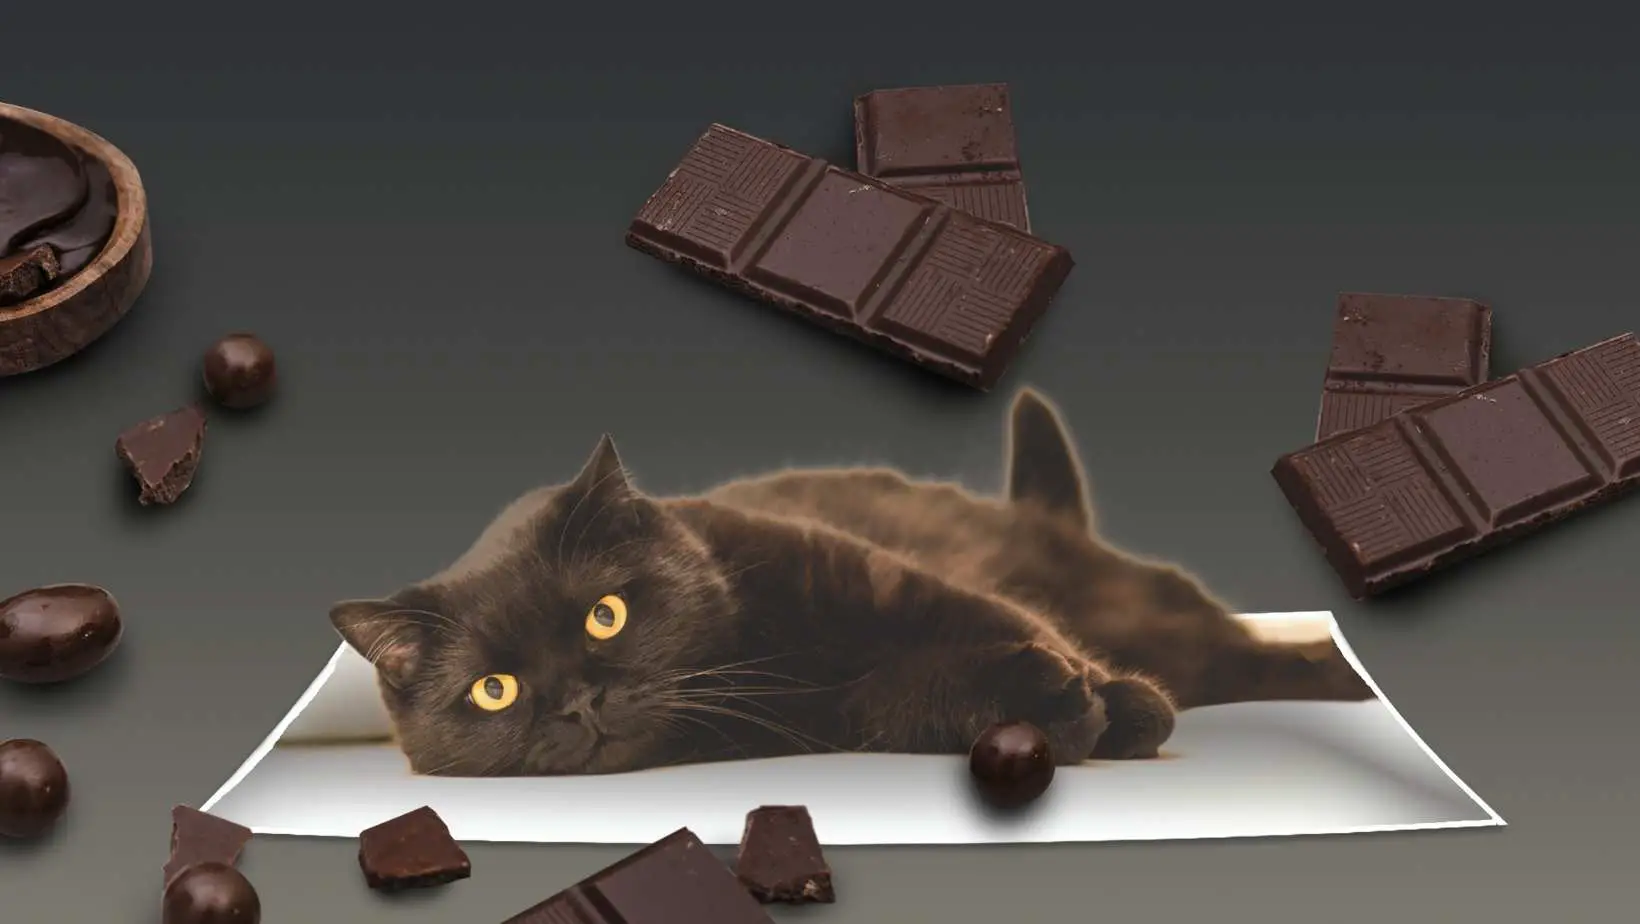 What happens if the cat eats chocolate?